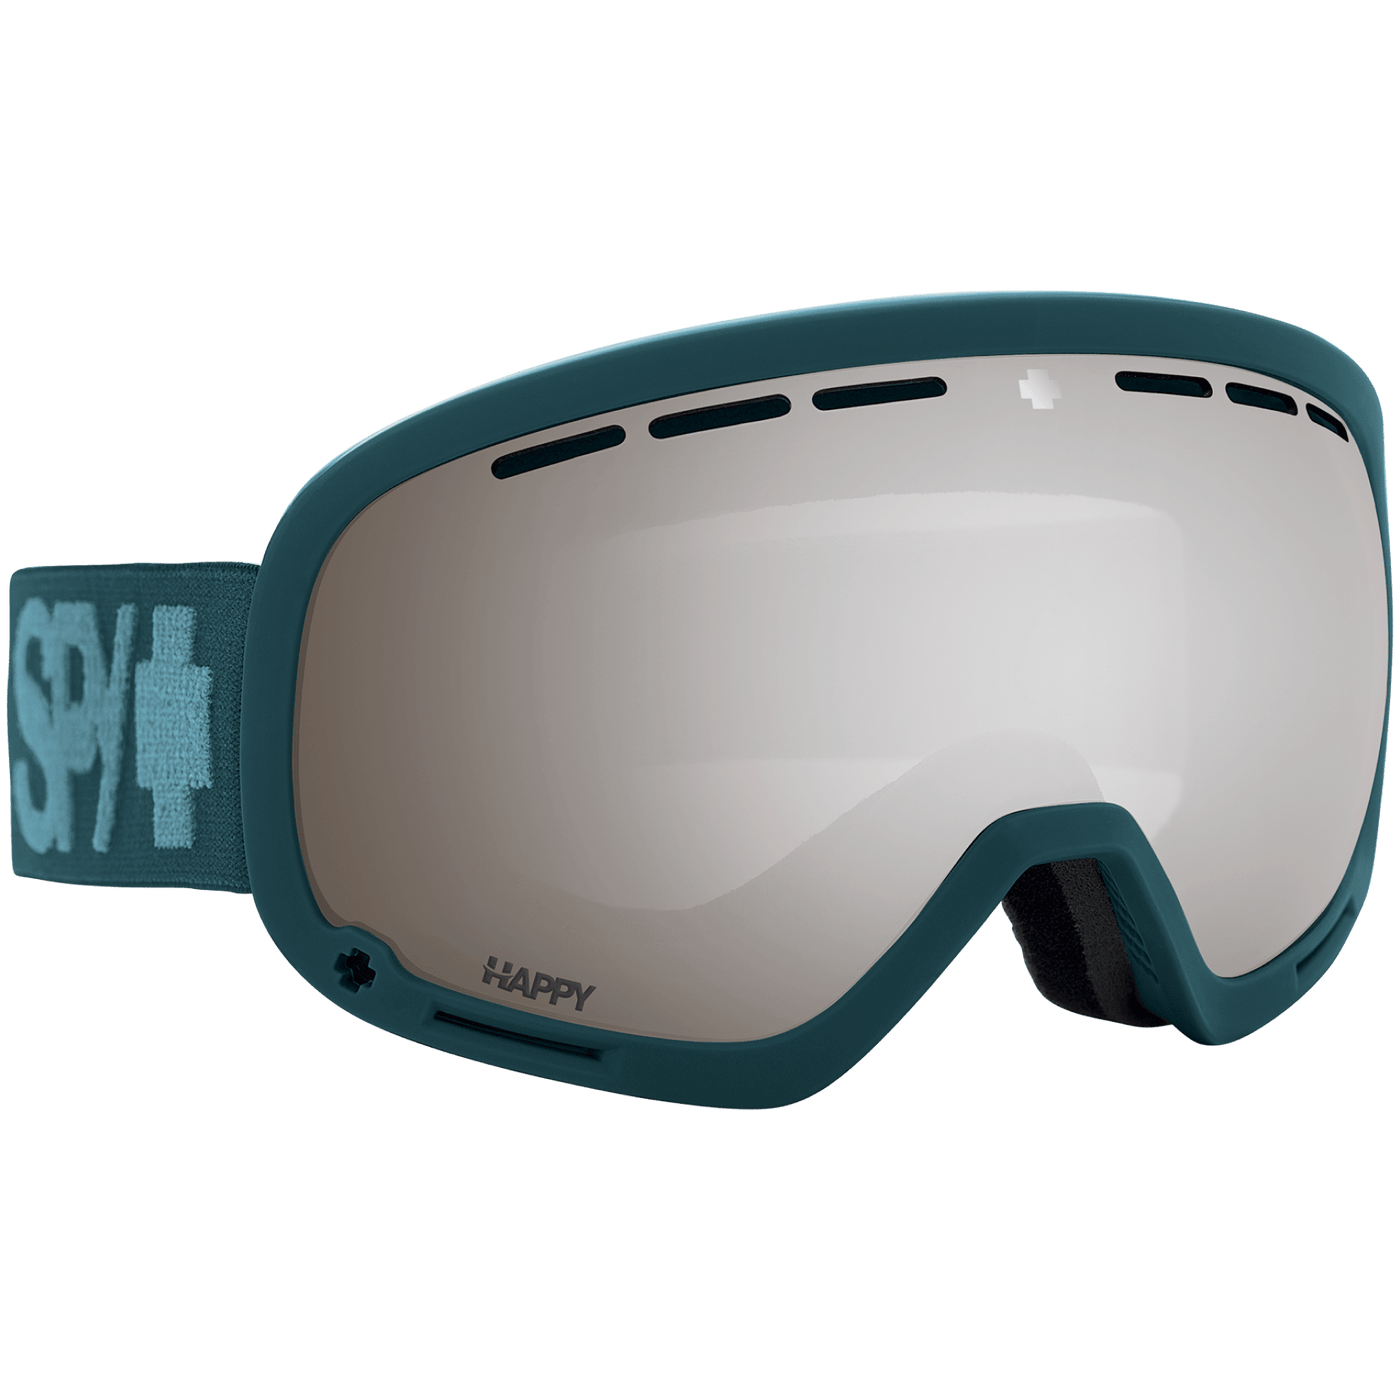 SPY Marshall Snow Goggles - Monochrome Teal 8Lines Shop - Fast Shipping